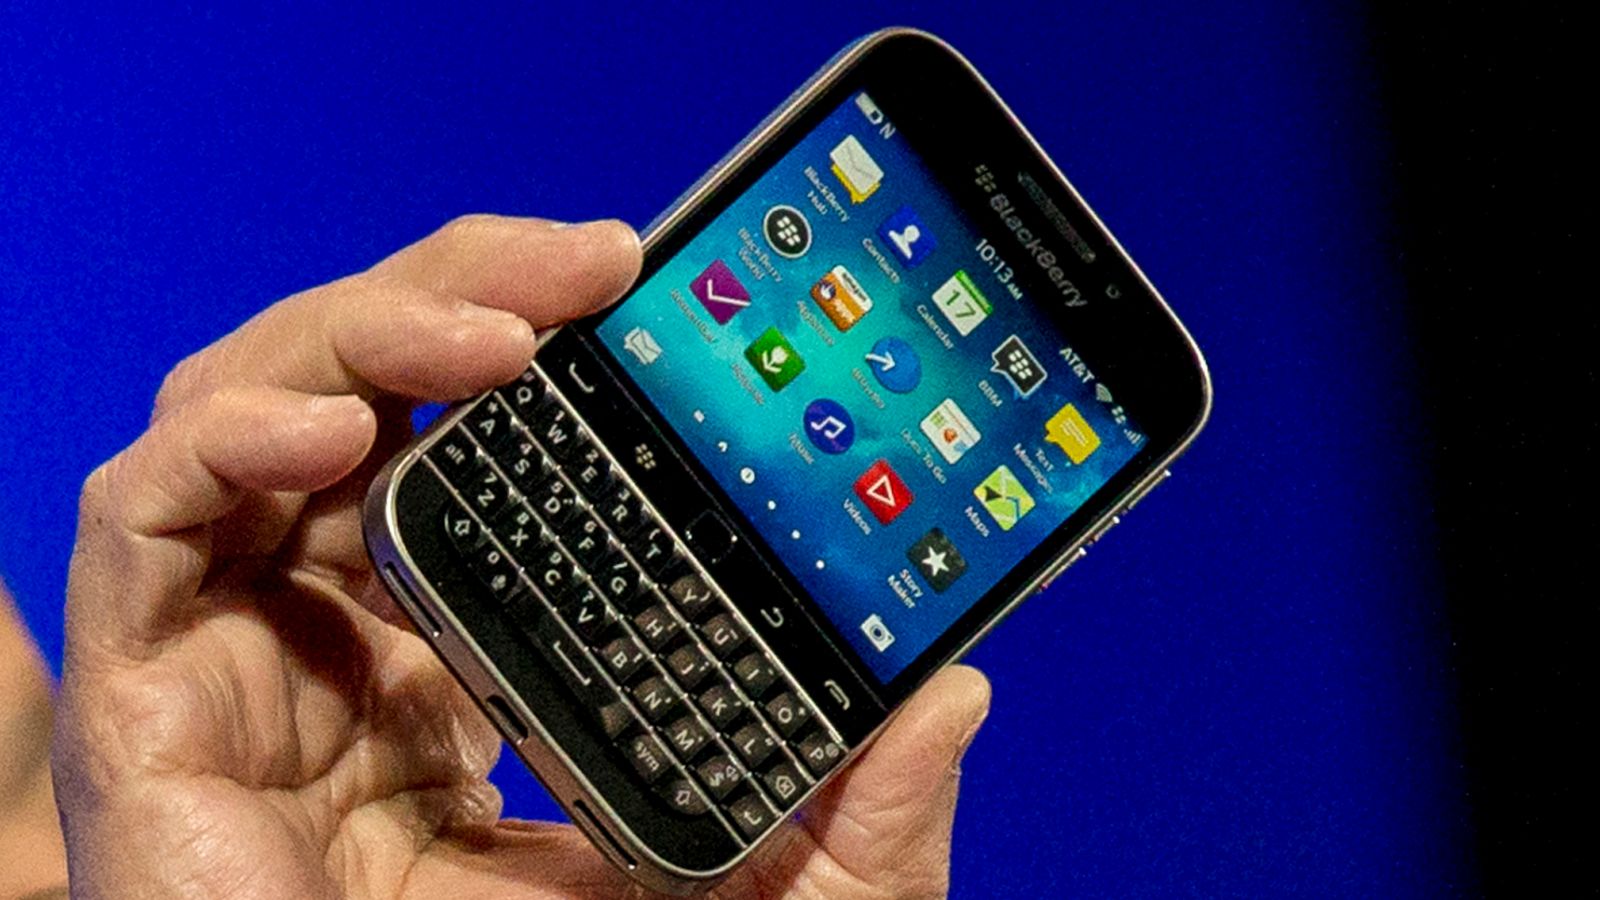 BlackBerry End of an era as company pulls plug on iconic handsets